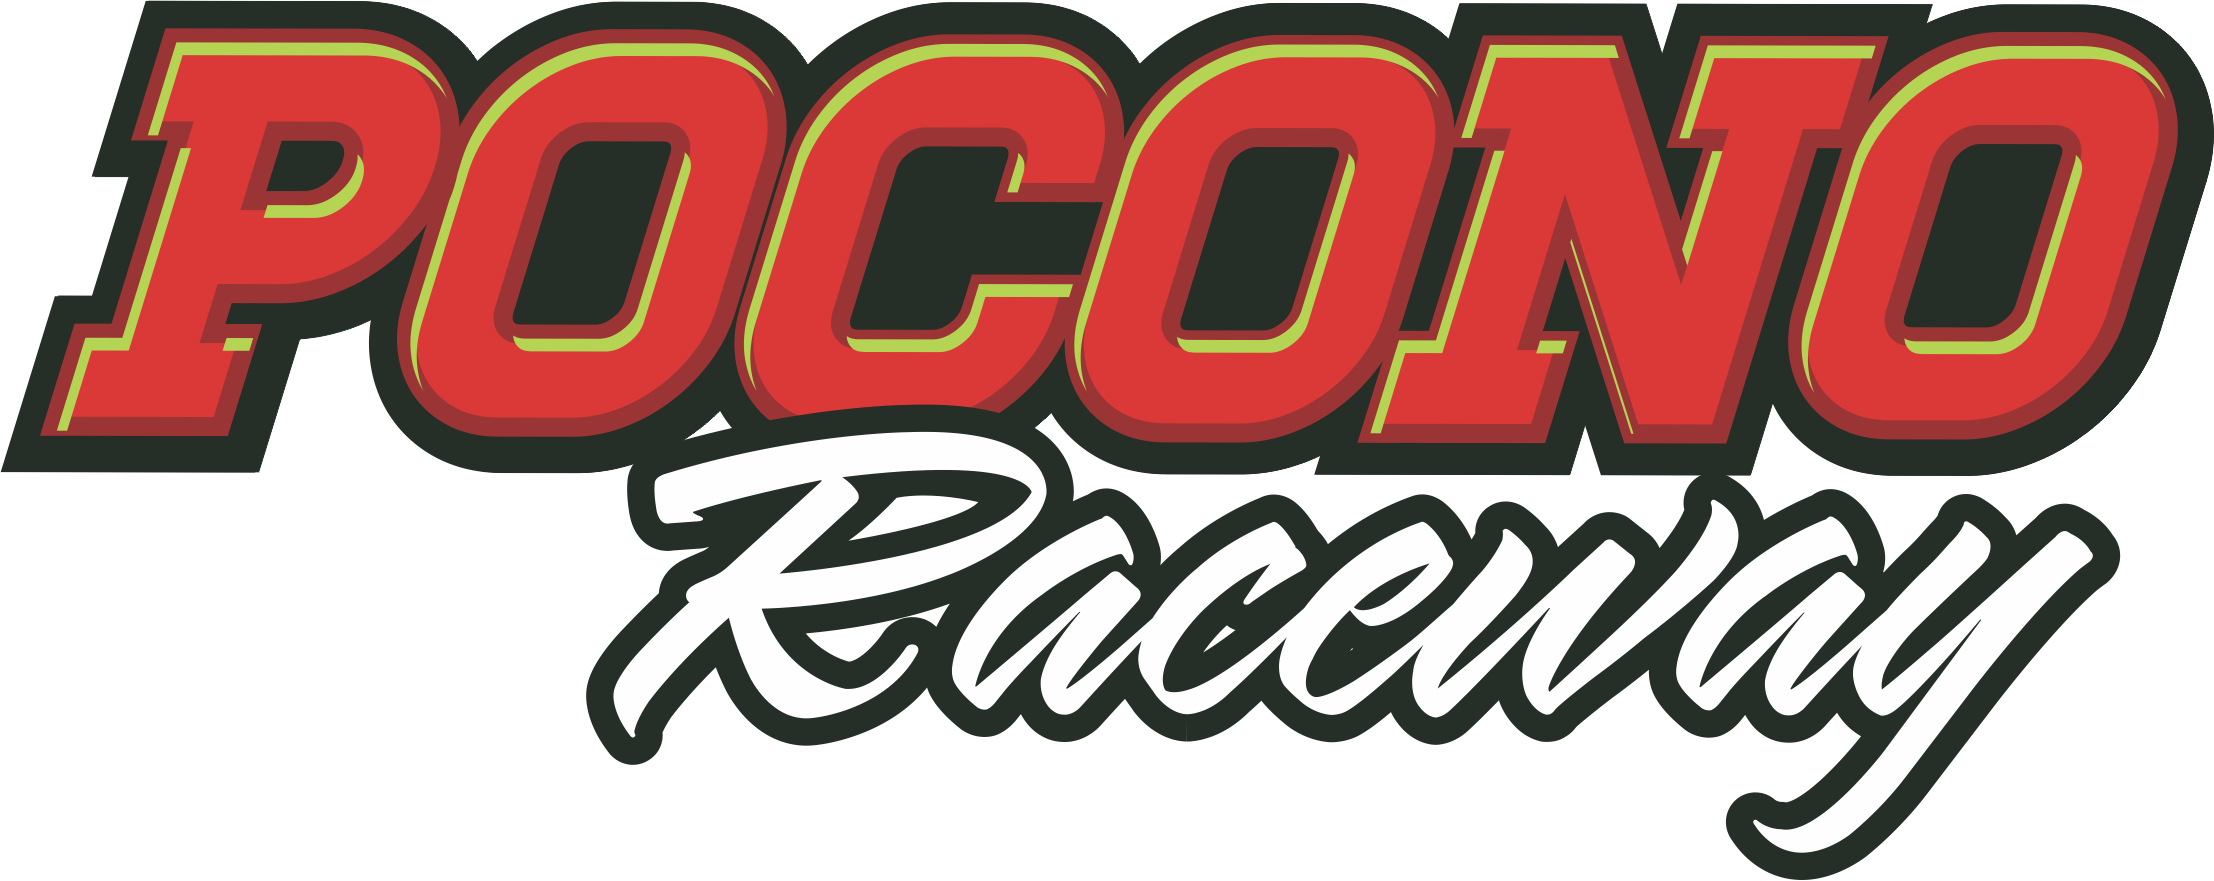 Pocono Raceway Nominated for USA Today’s 10BEST Readers’ Choice Travel Awards – Speedway Digest – Home for NASCAR News